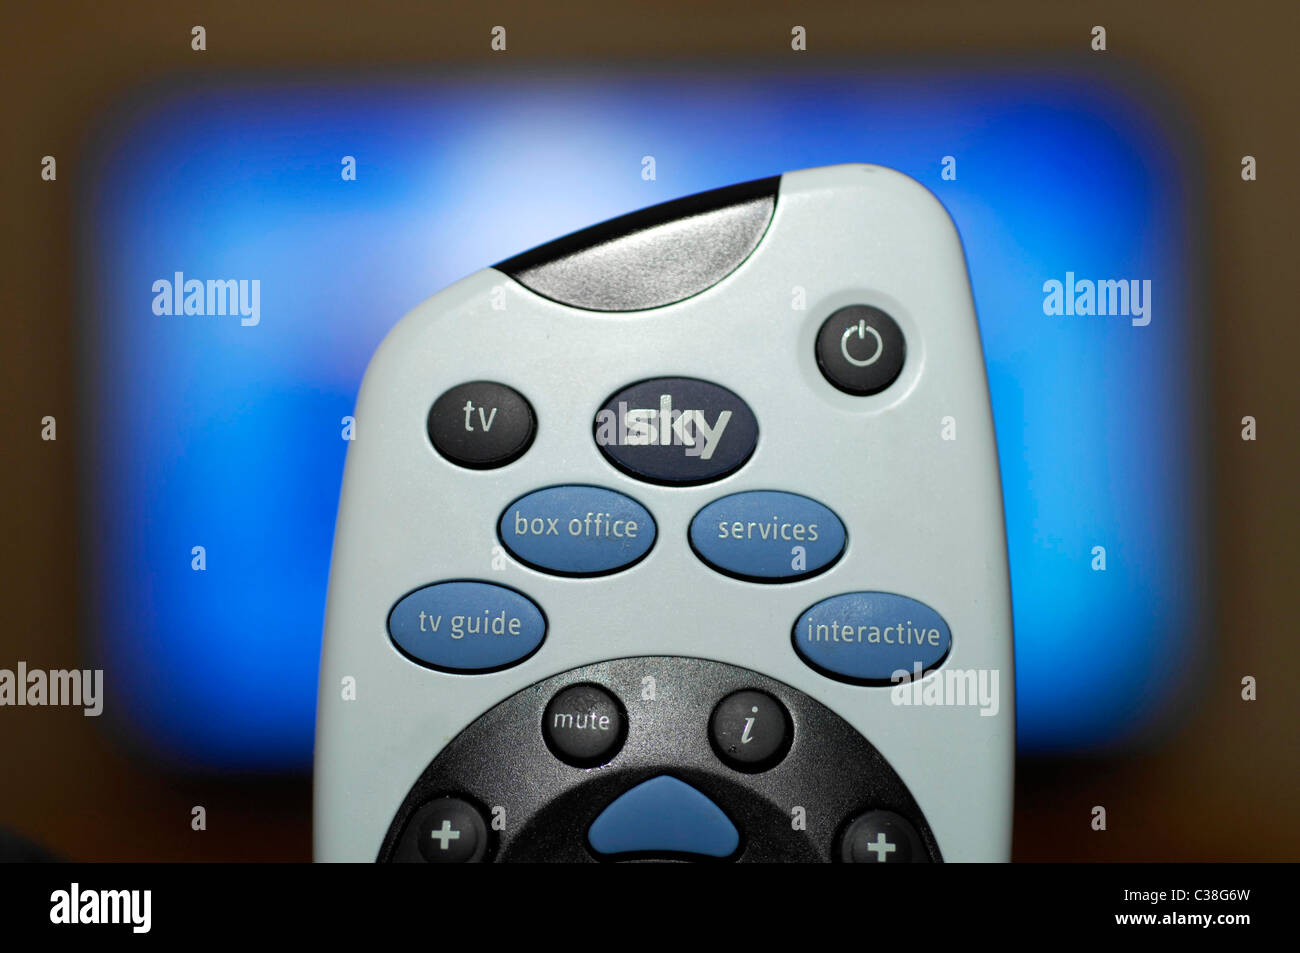 Illustrative image of Sky's television services. Stock Photo